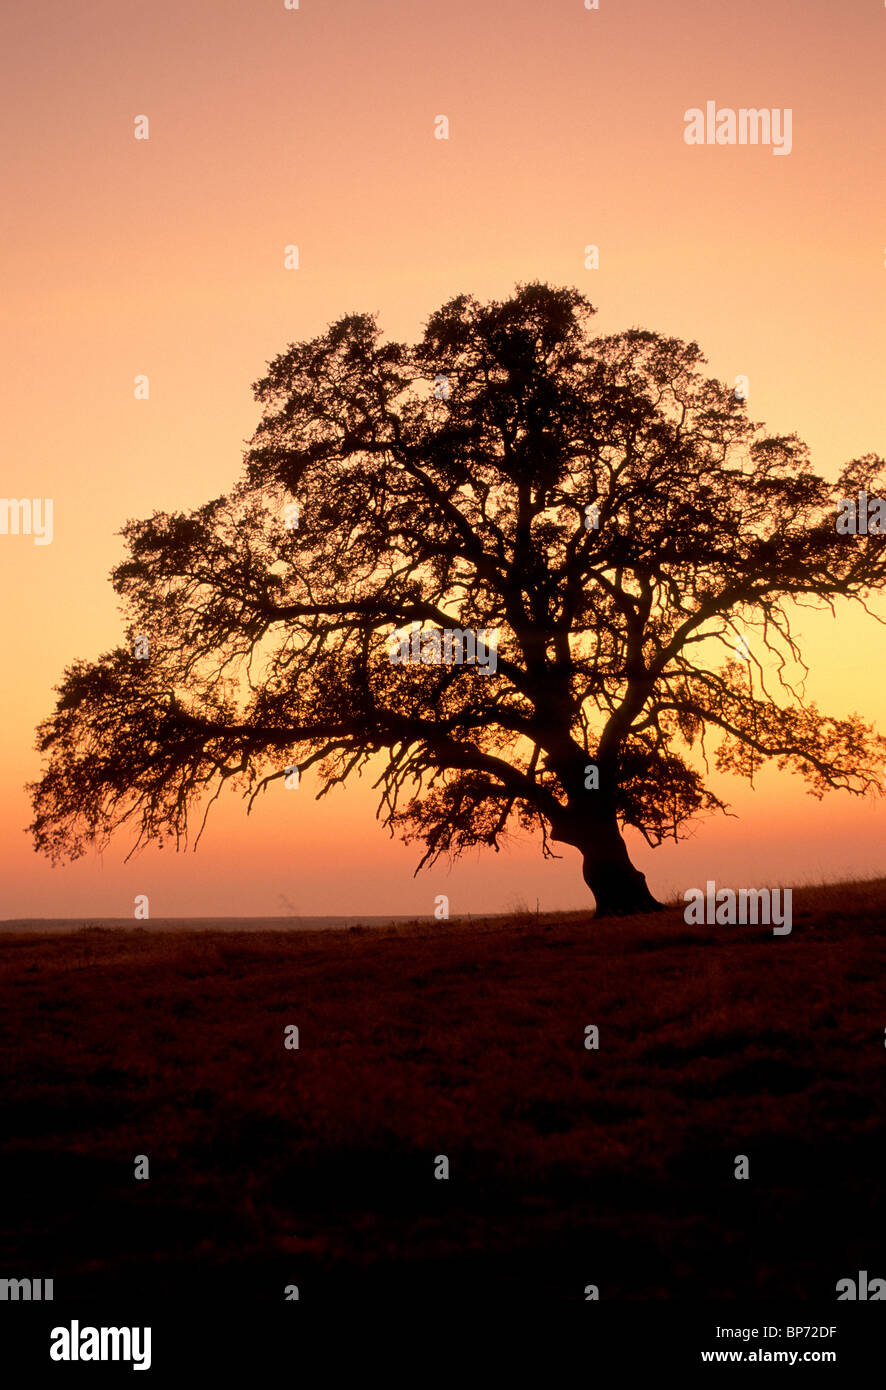 Lone Oak tree silhouetted against sunset sky, Stock Photo